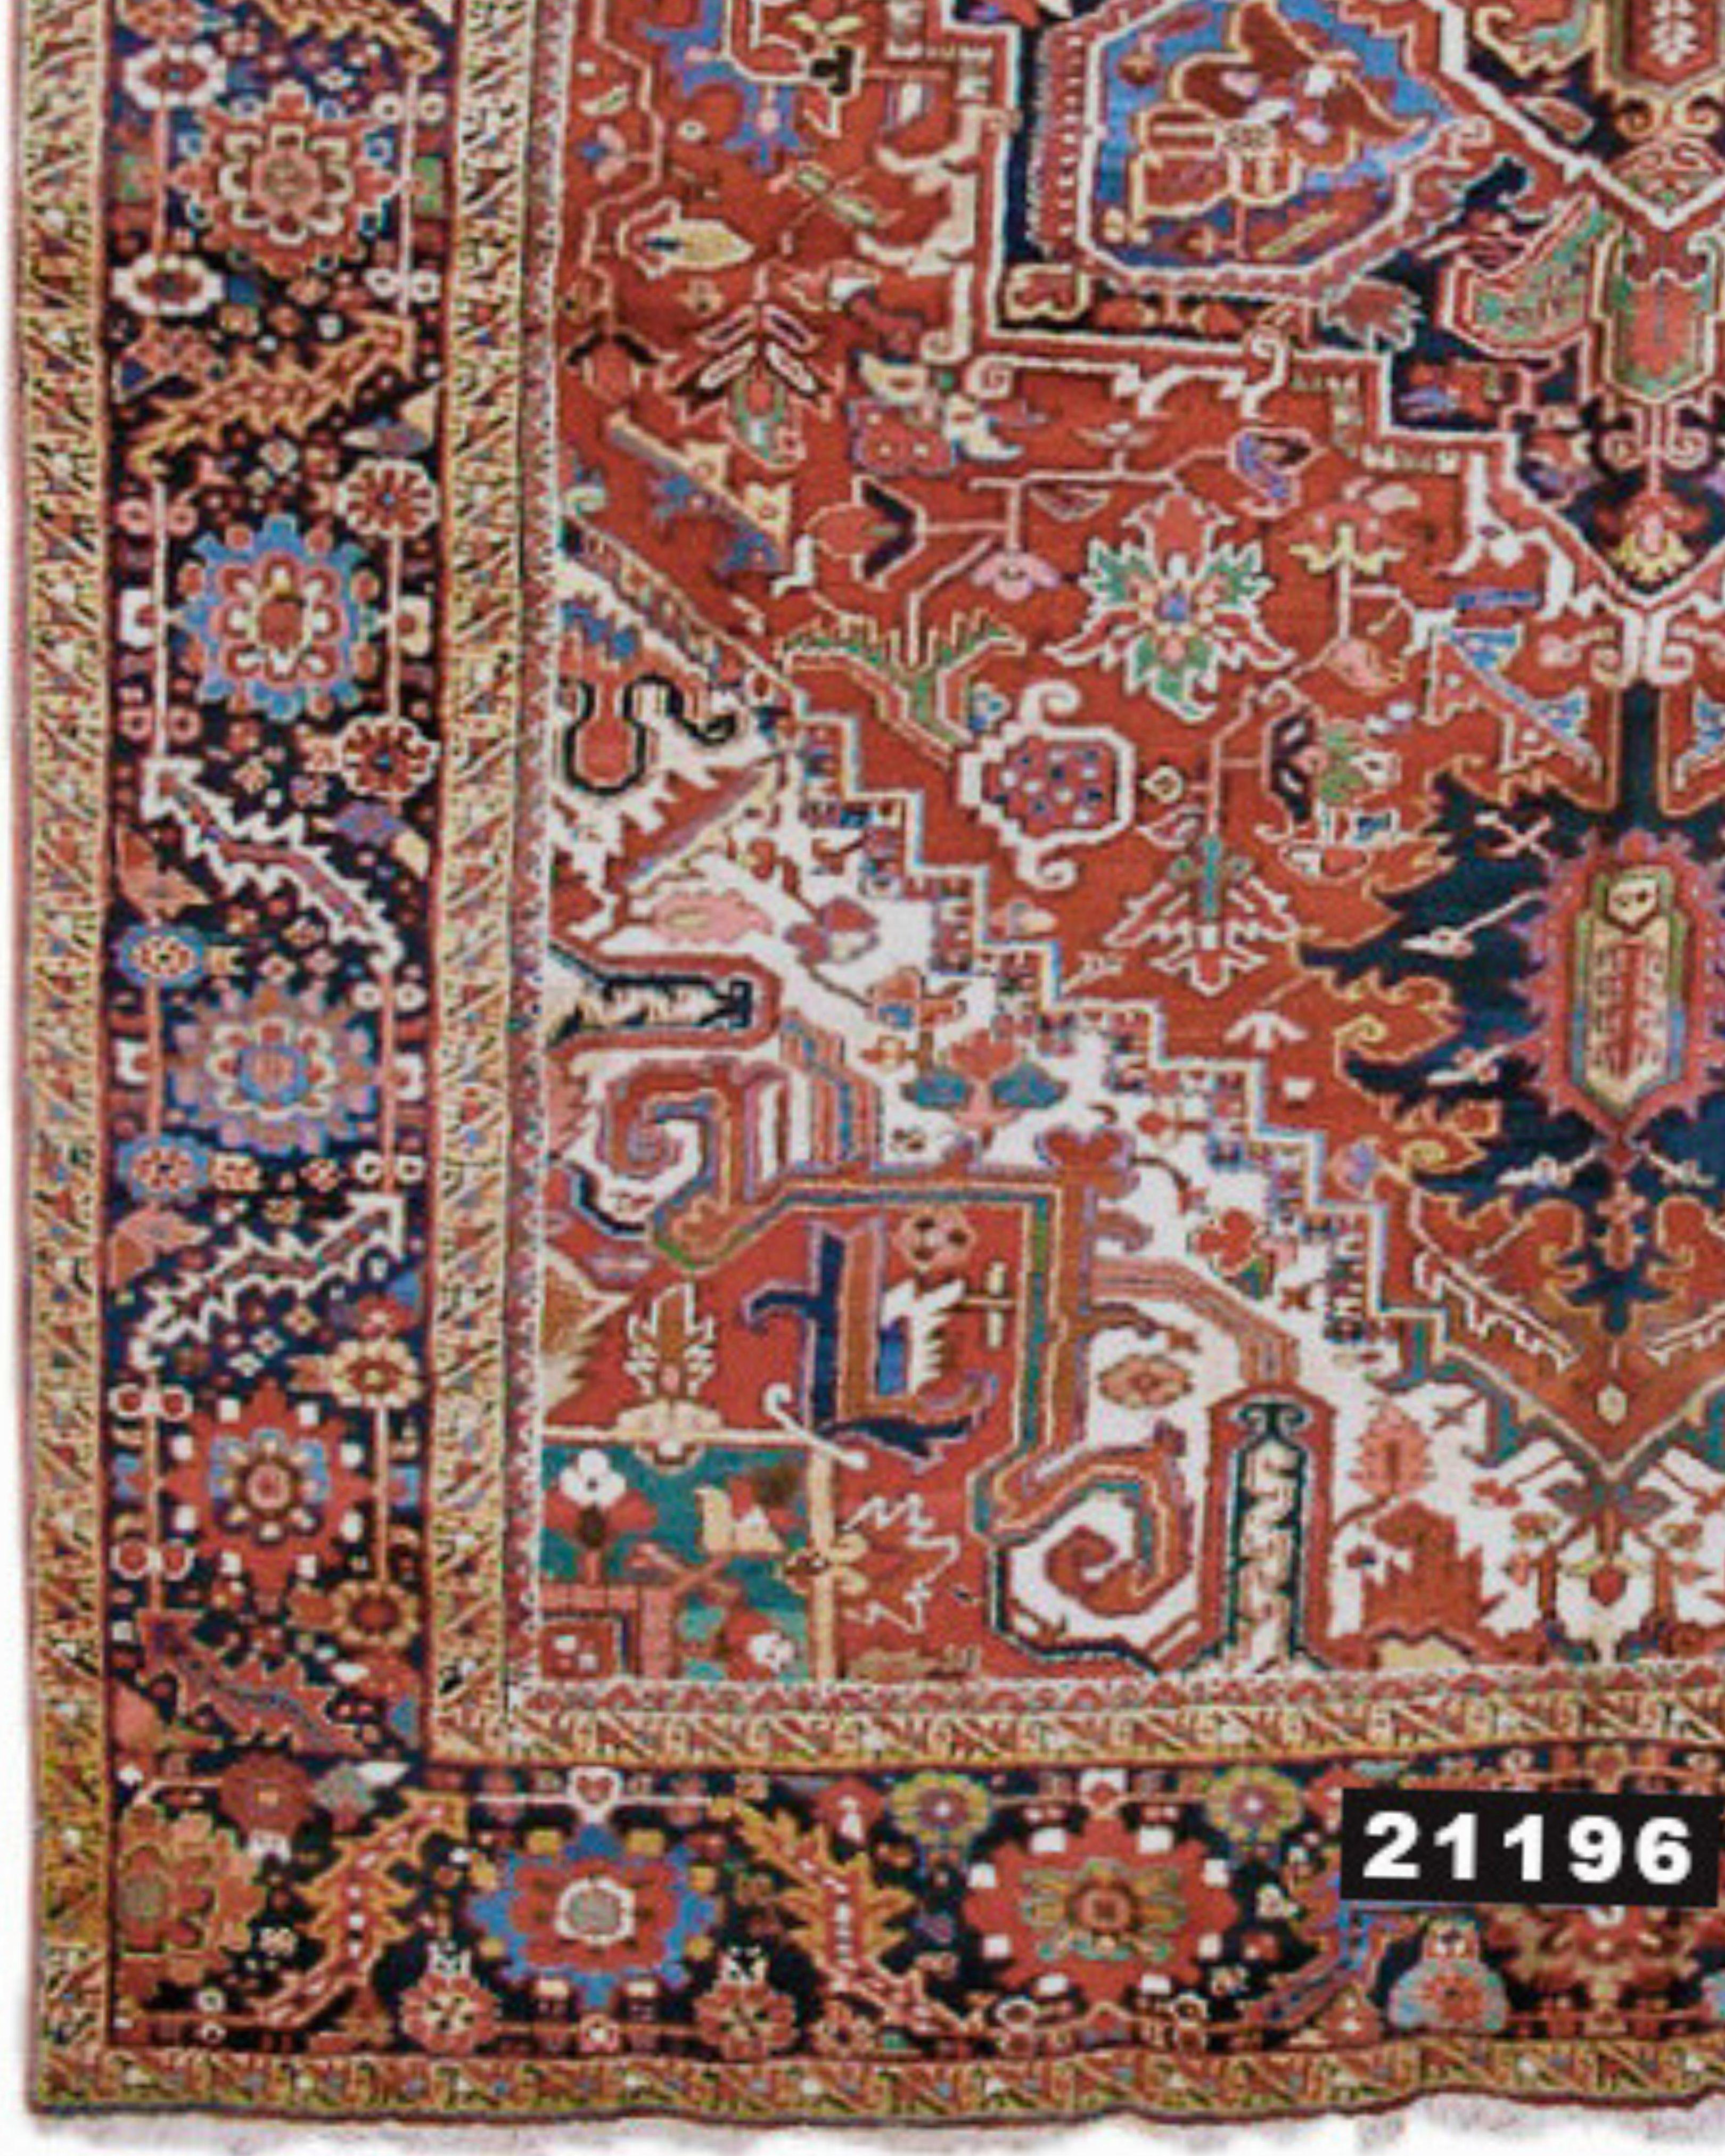 Hand-Woven Antique Persian Heriz Rug, Early 20th Century